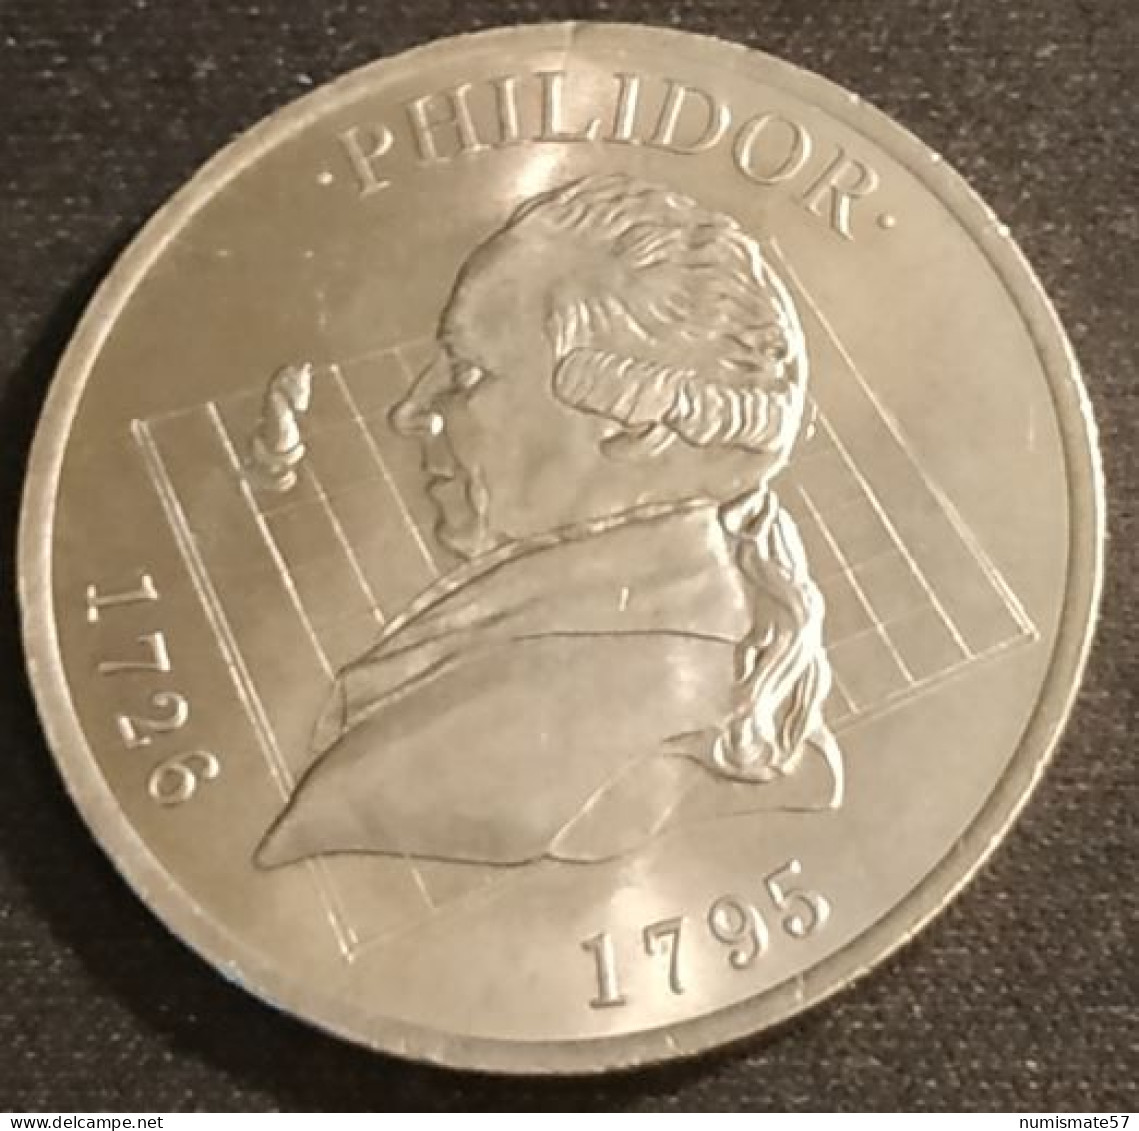 RARE - FRANCE - DREUX - 2 EURO 1998 - PHILIDOR - ( 5000 Ex. ) - Euros Of The Cities